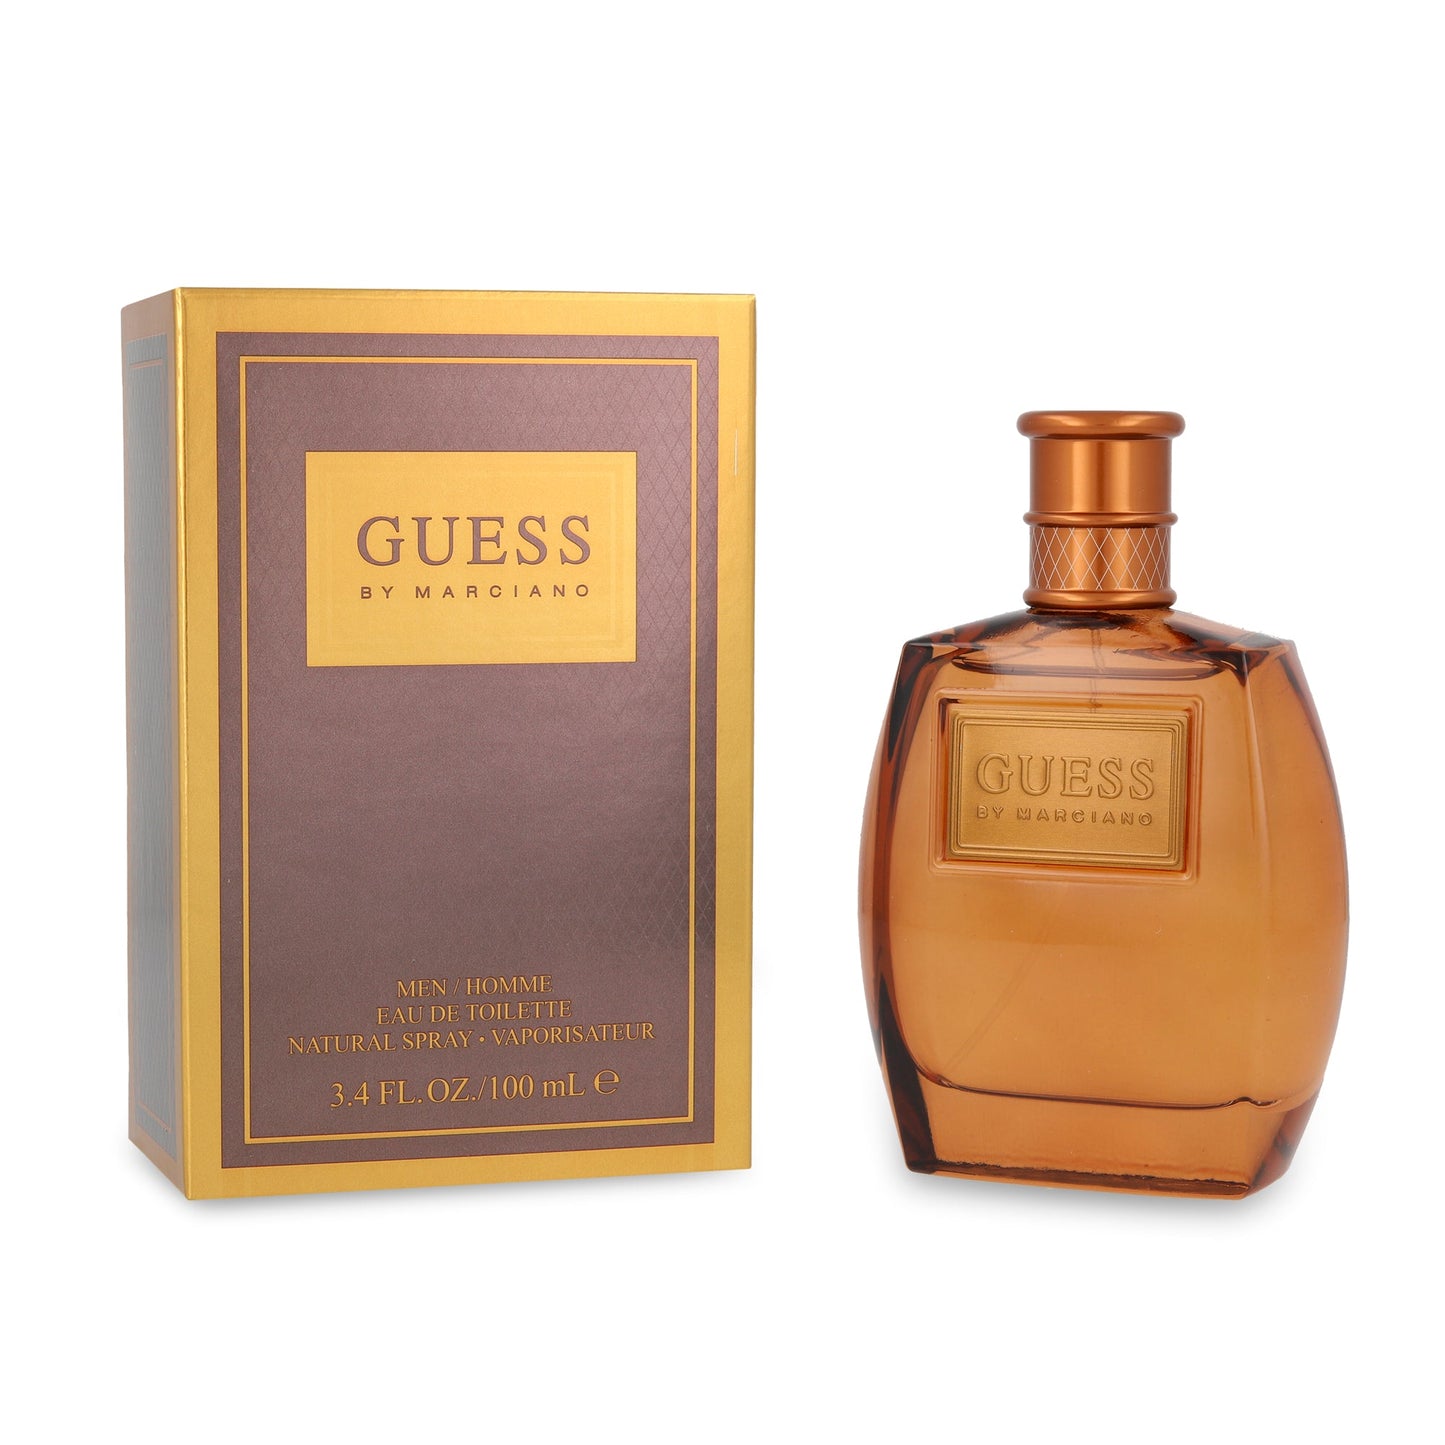 GUESS BY MARCIANO 100 ML EDT SPRAY